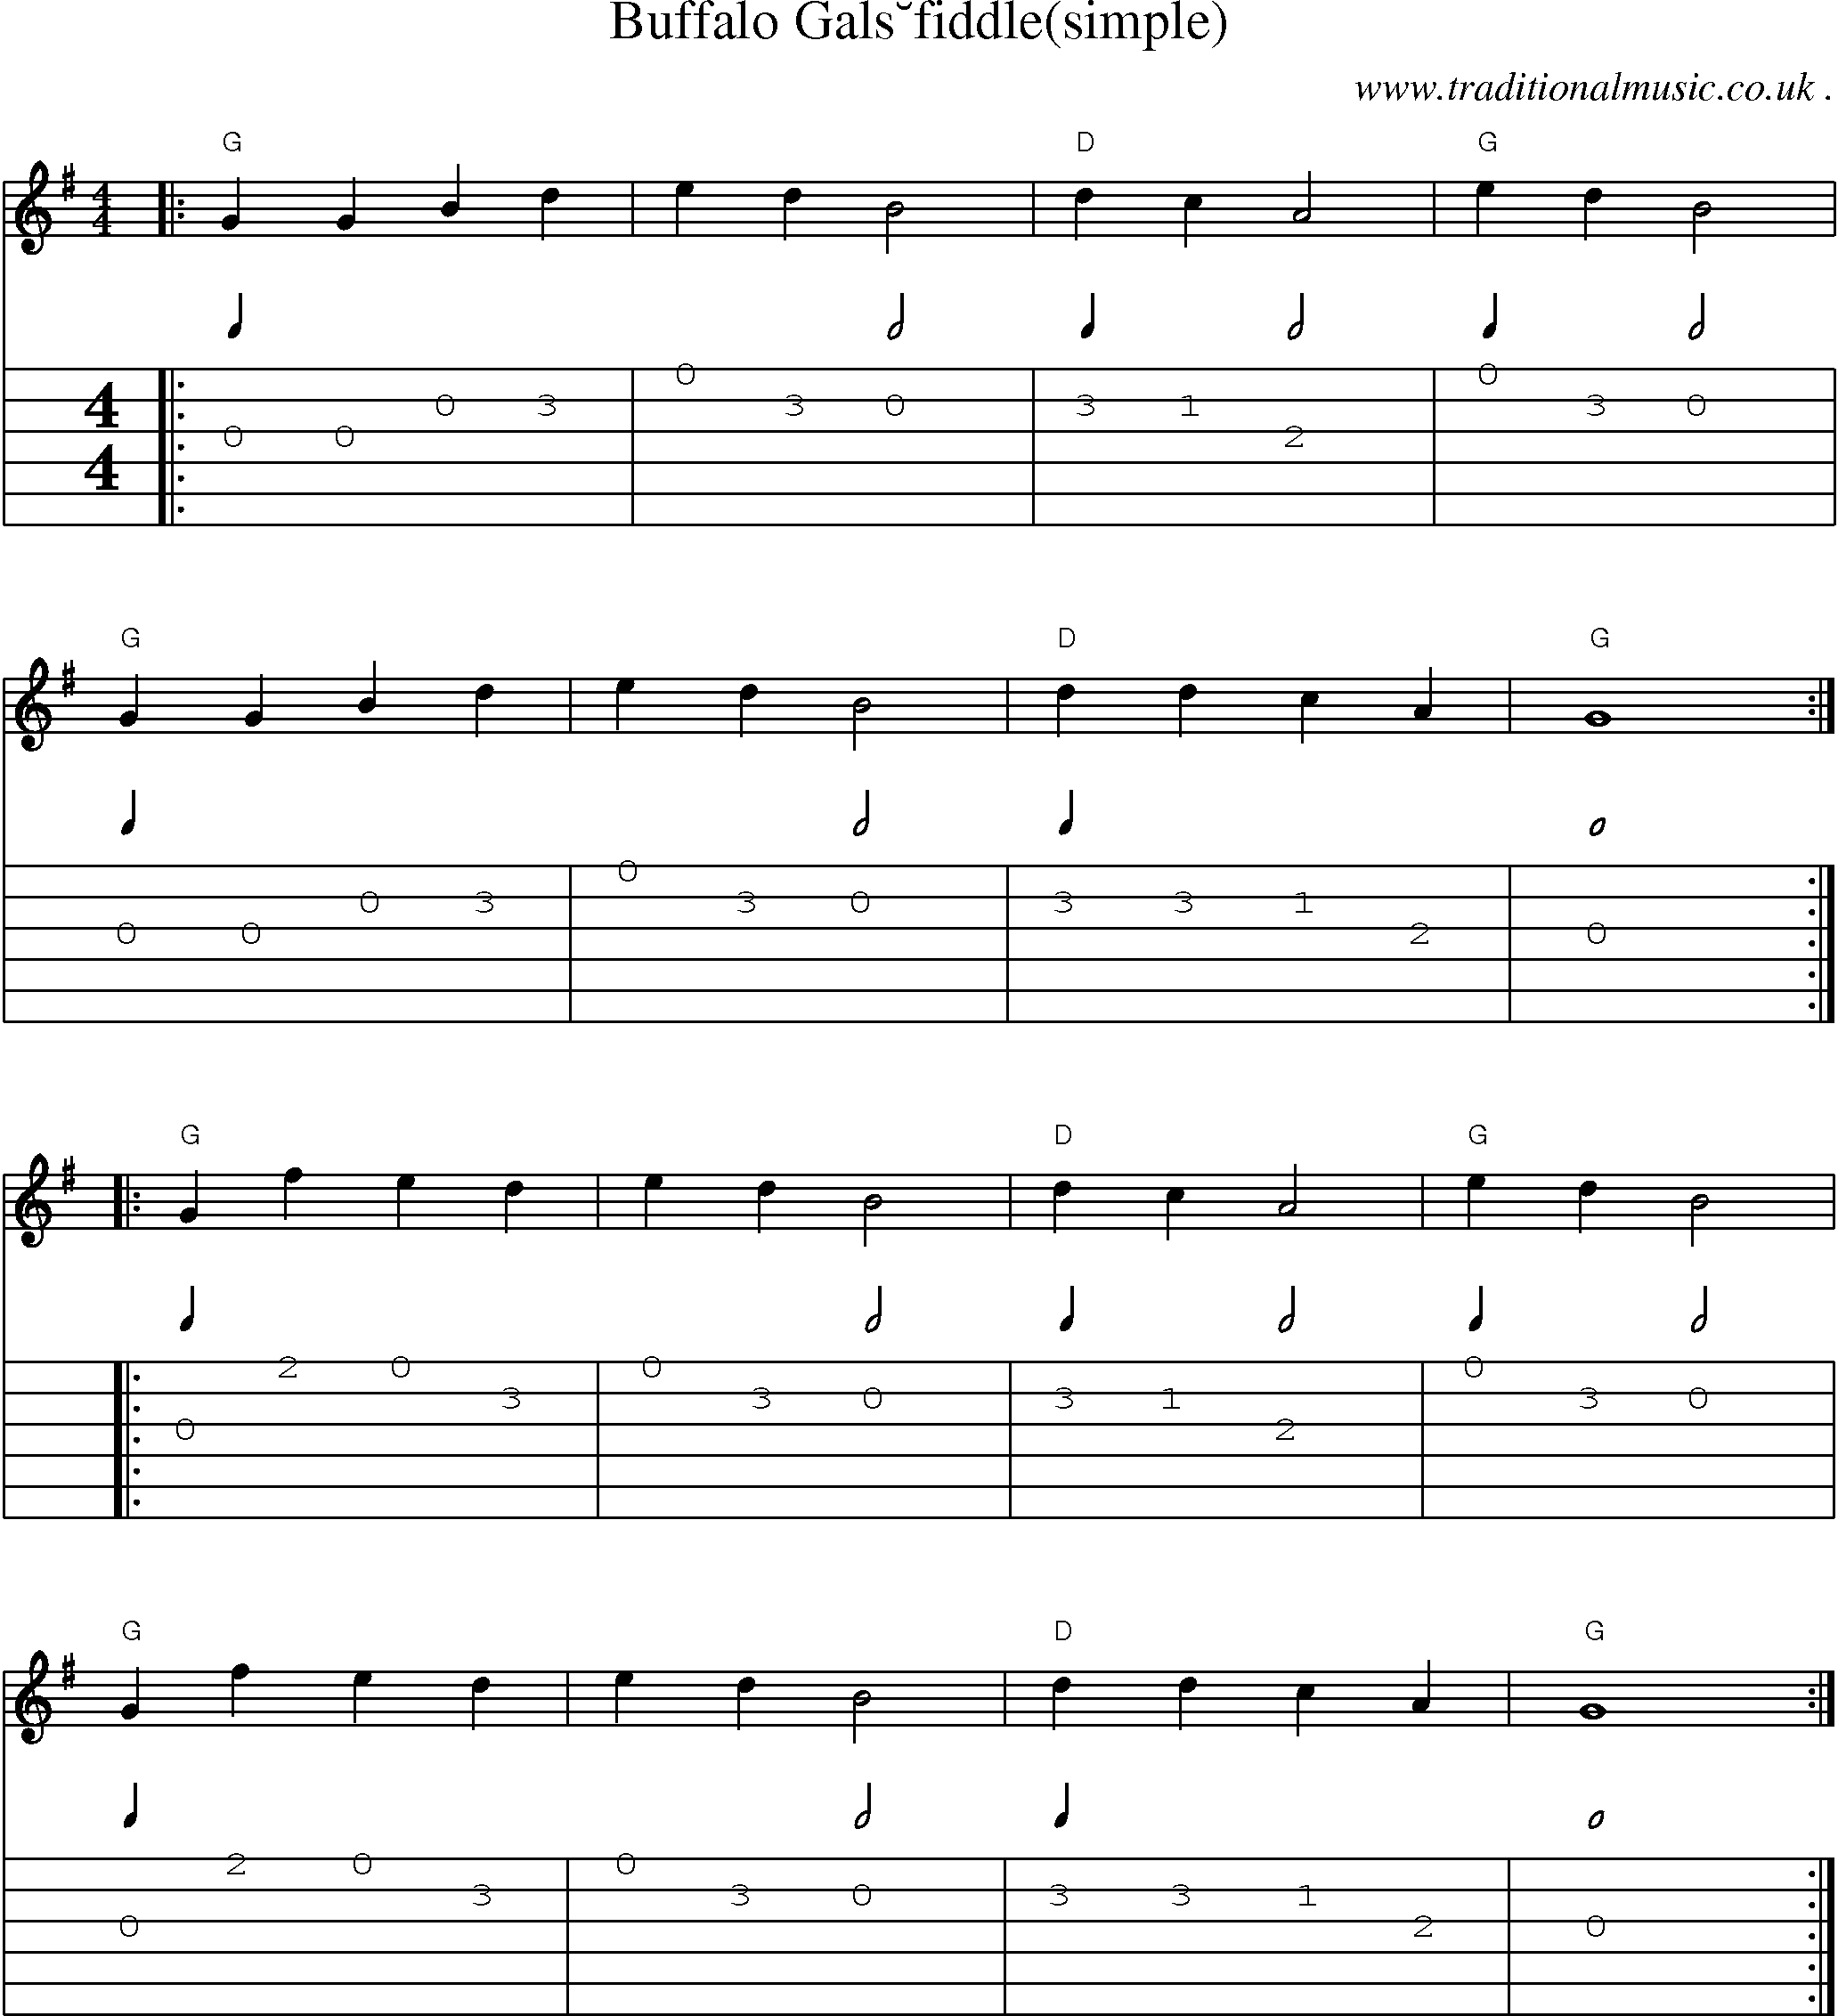 Music Score and Guitar Tabs for Buffalo Gals fiddle si